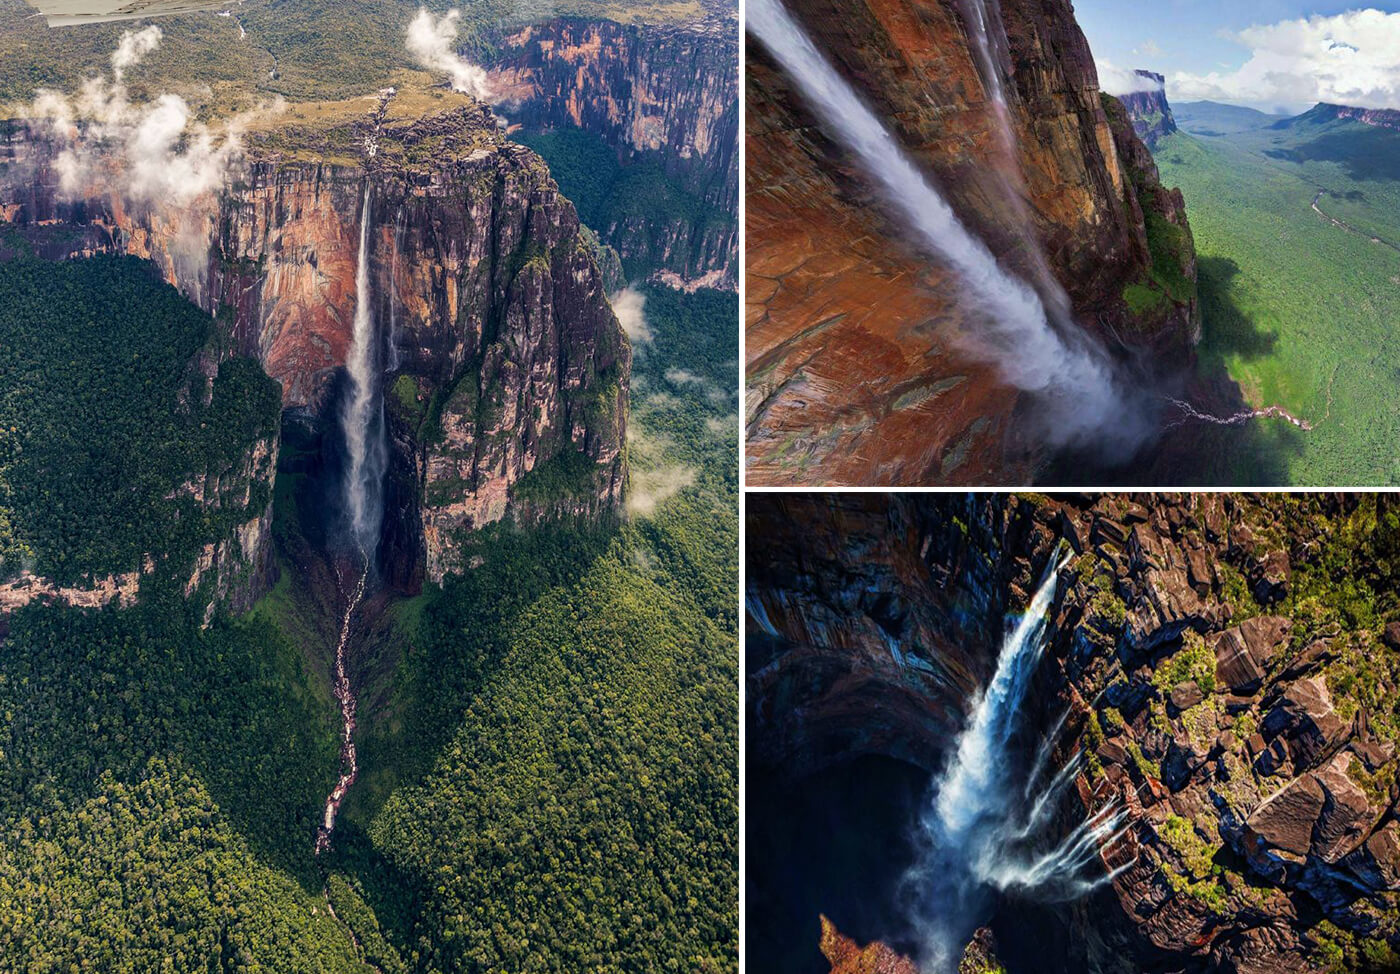 MyBestPlace - Salto Angel, the highest waterfall in the world